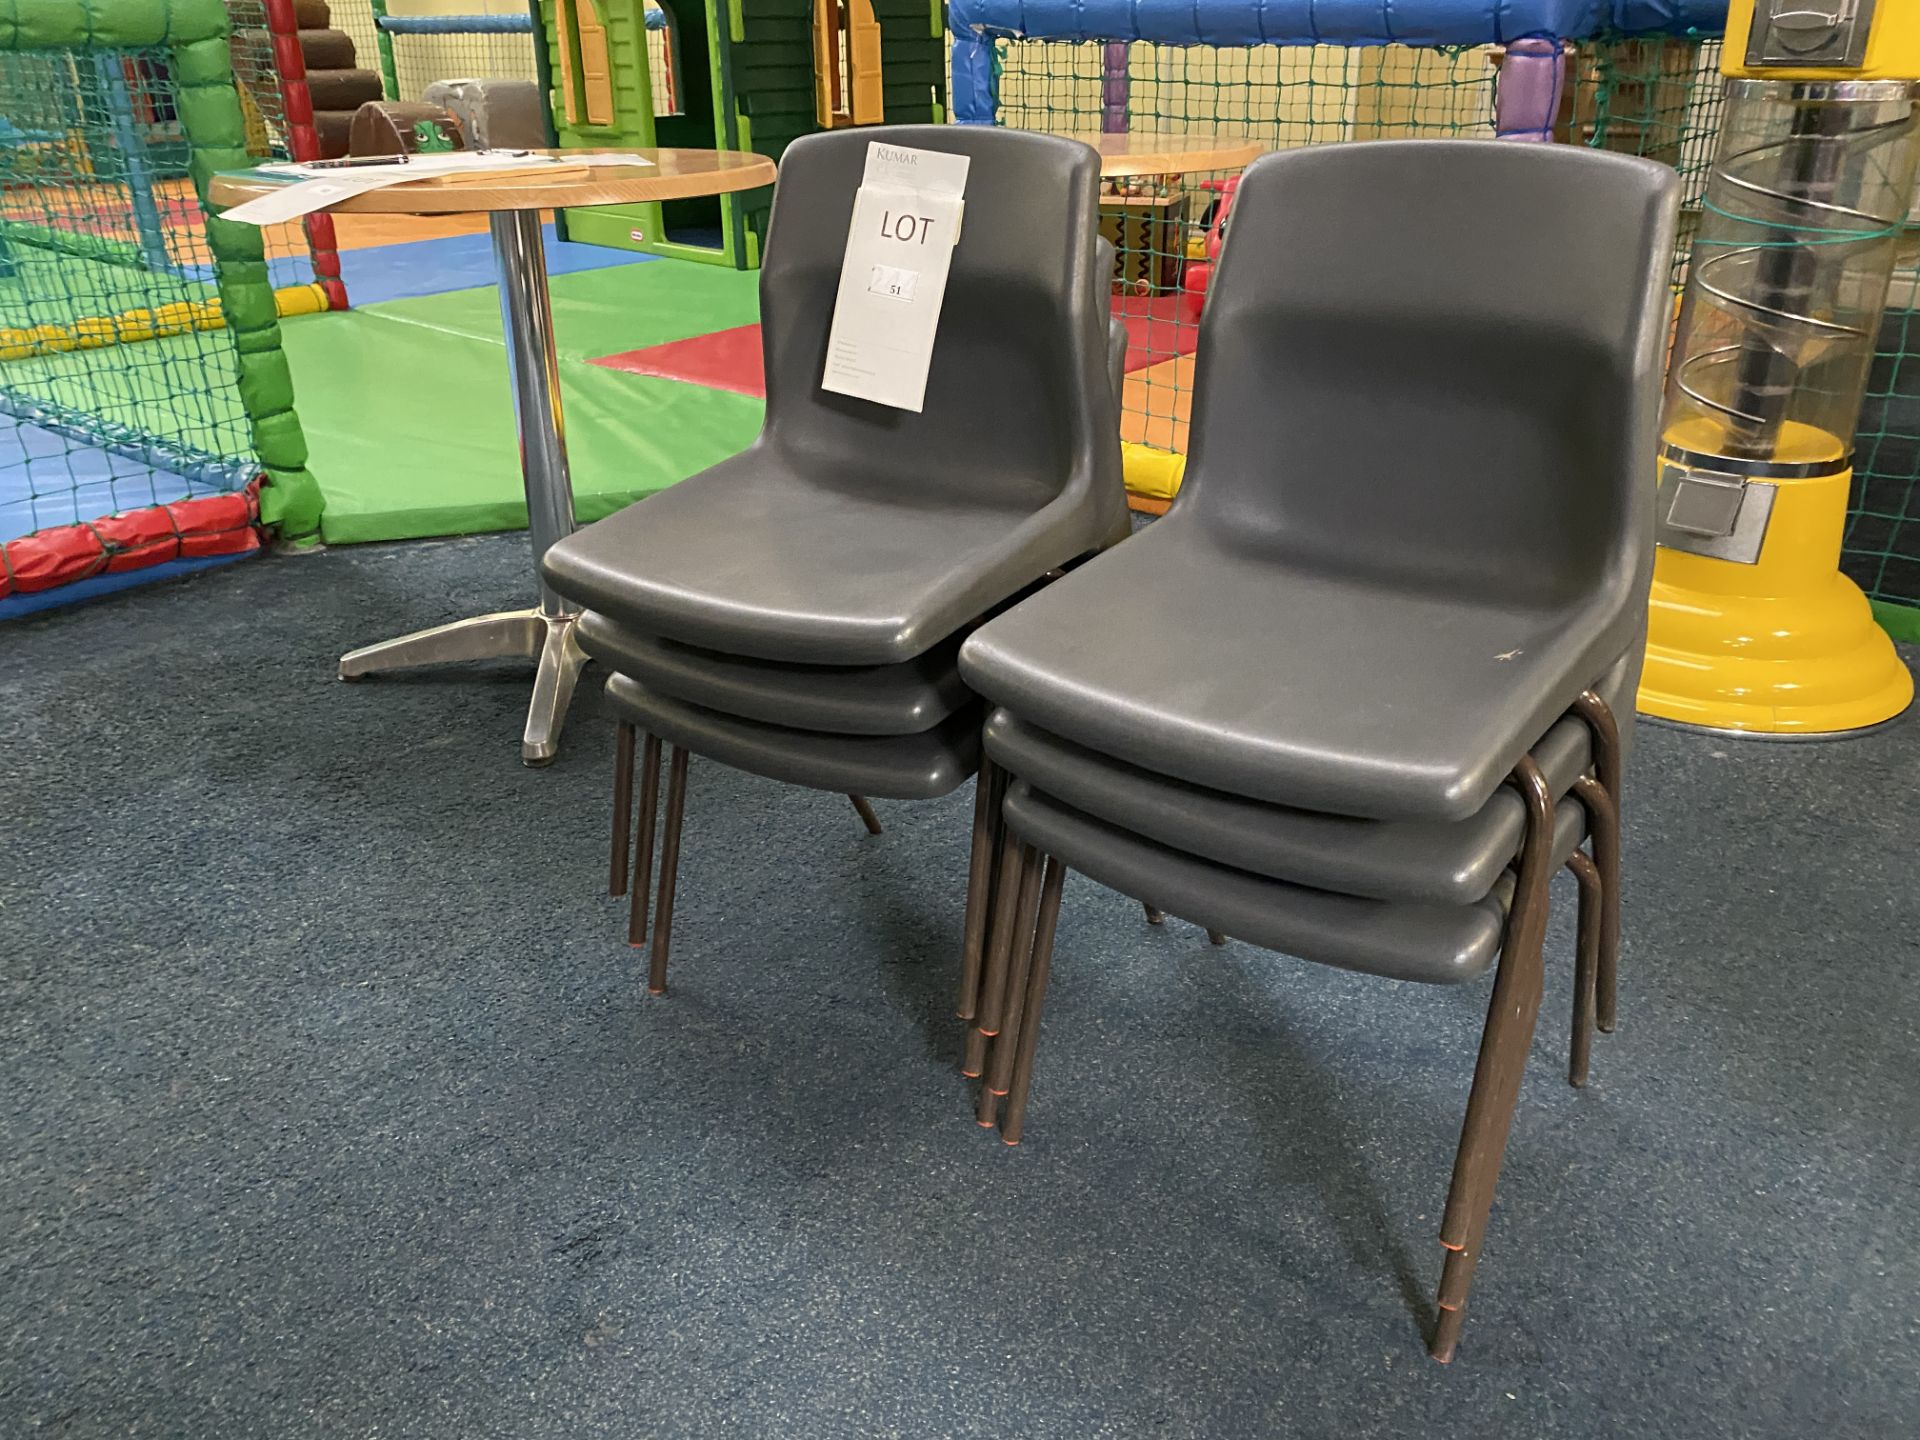 6x Small Plastic Children's Chairs - Image 3 of 4